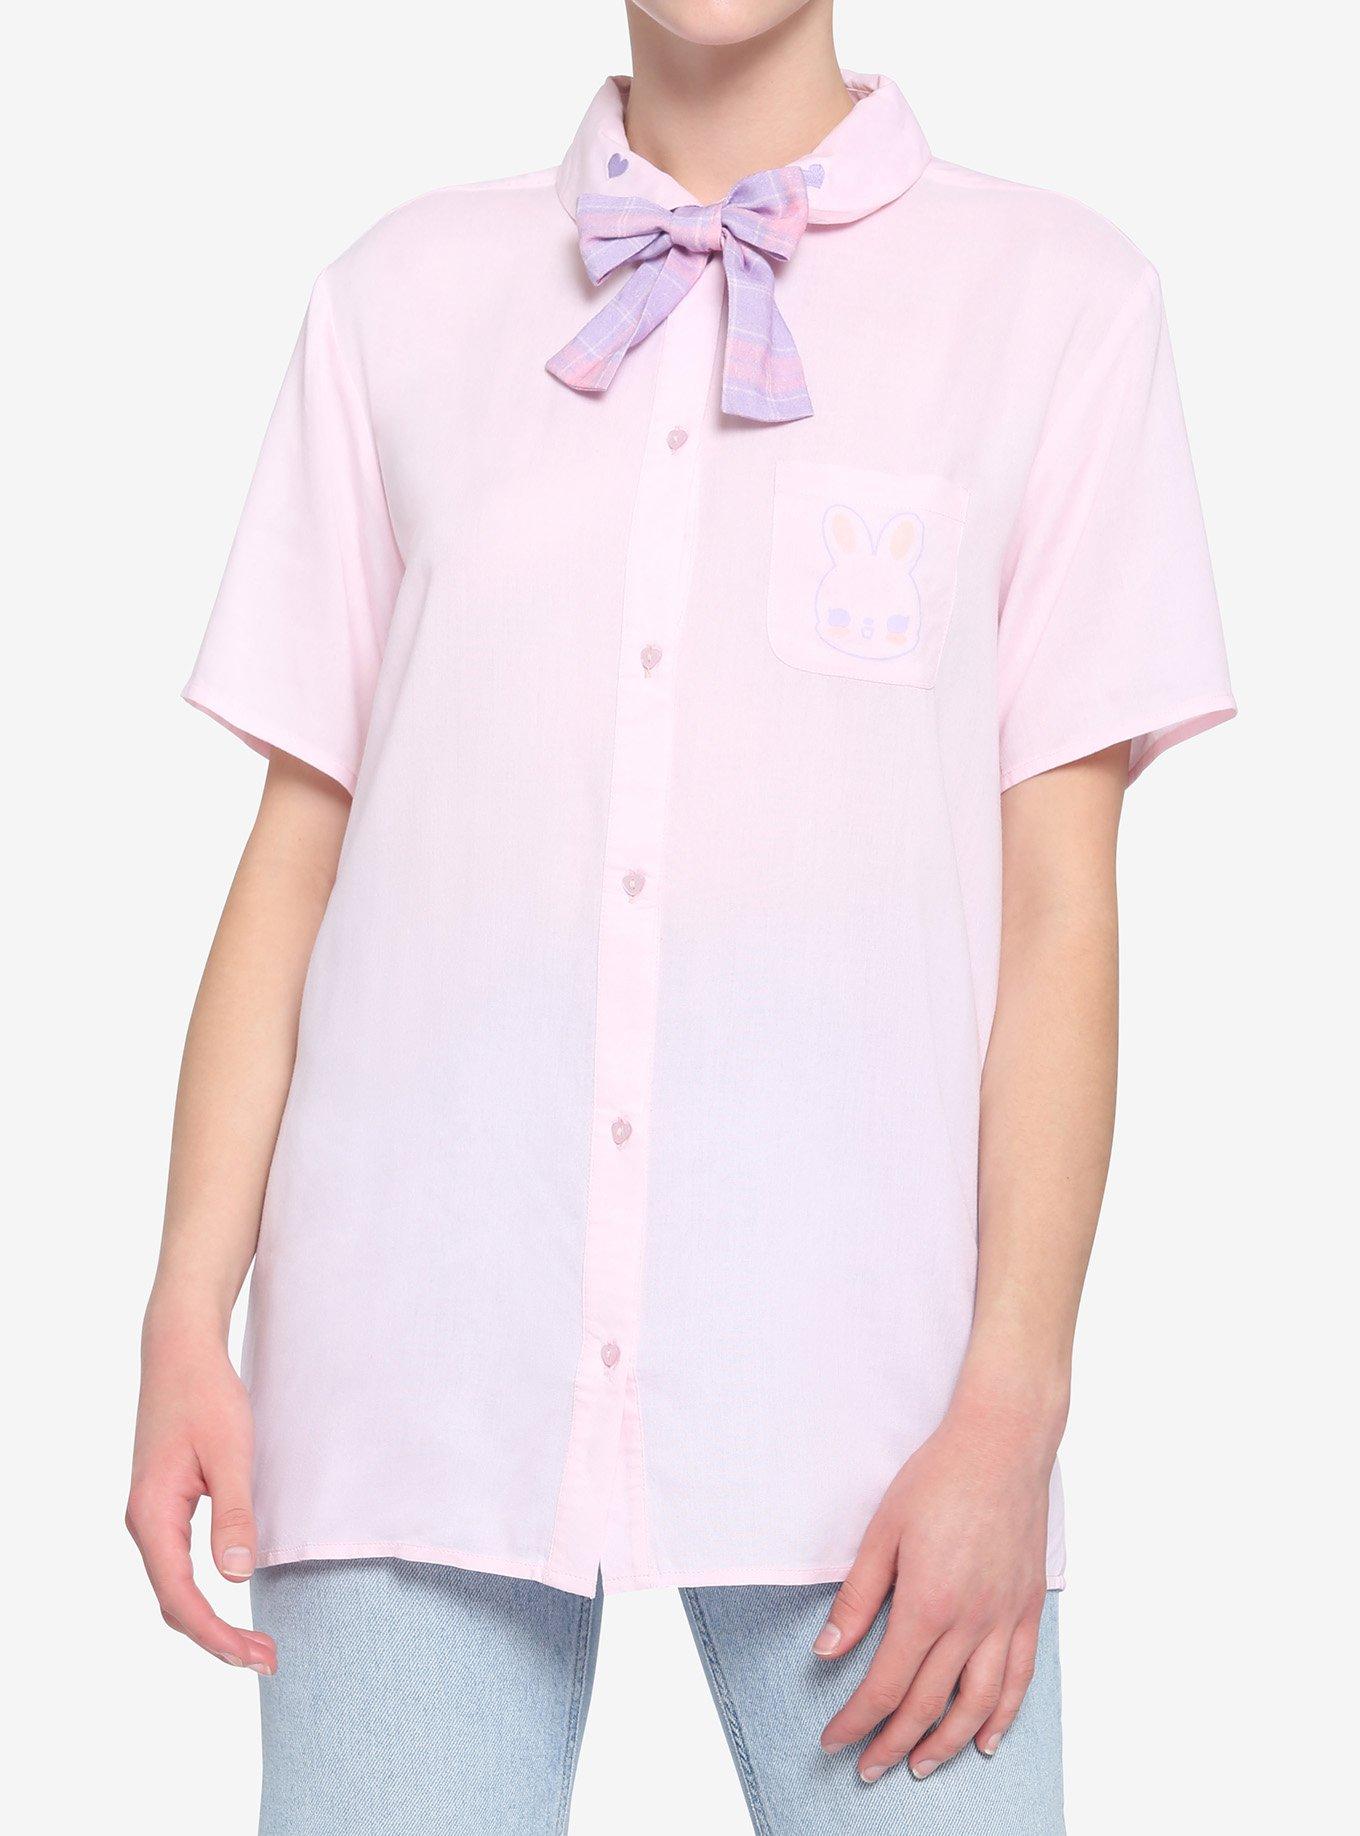 Kawaii Pastel Bunny Bow Girls Woven Button-Up, MULTI, hi-res